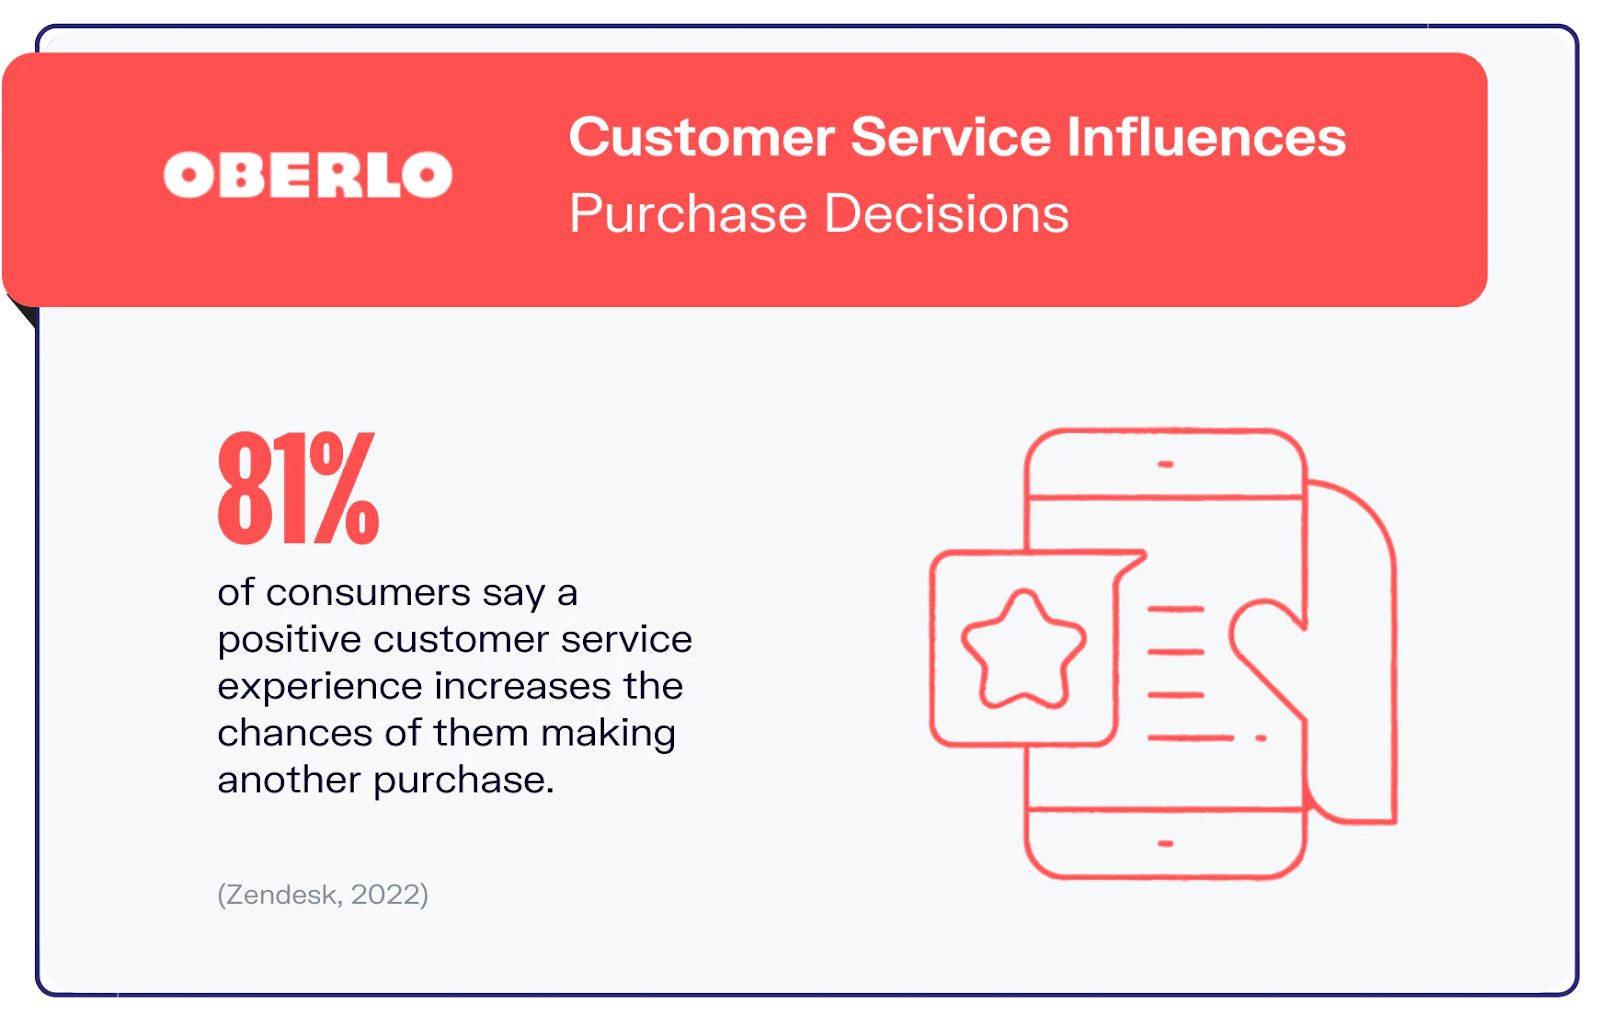 An image detailing the importance of customer service